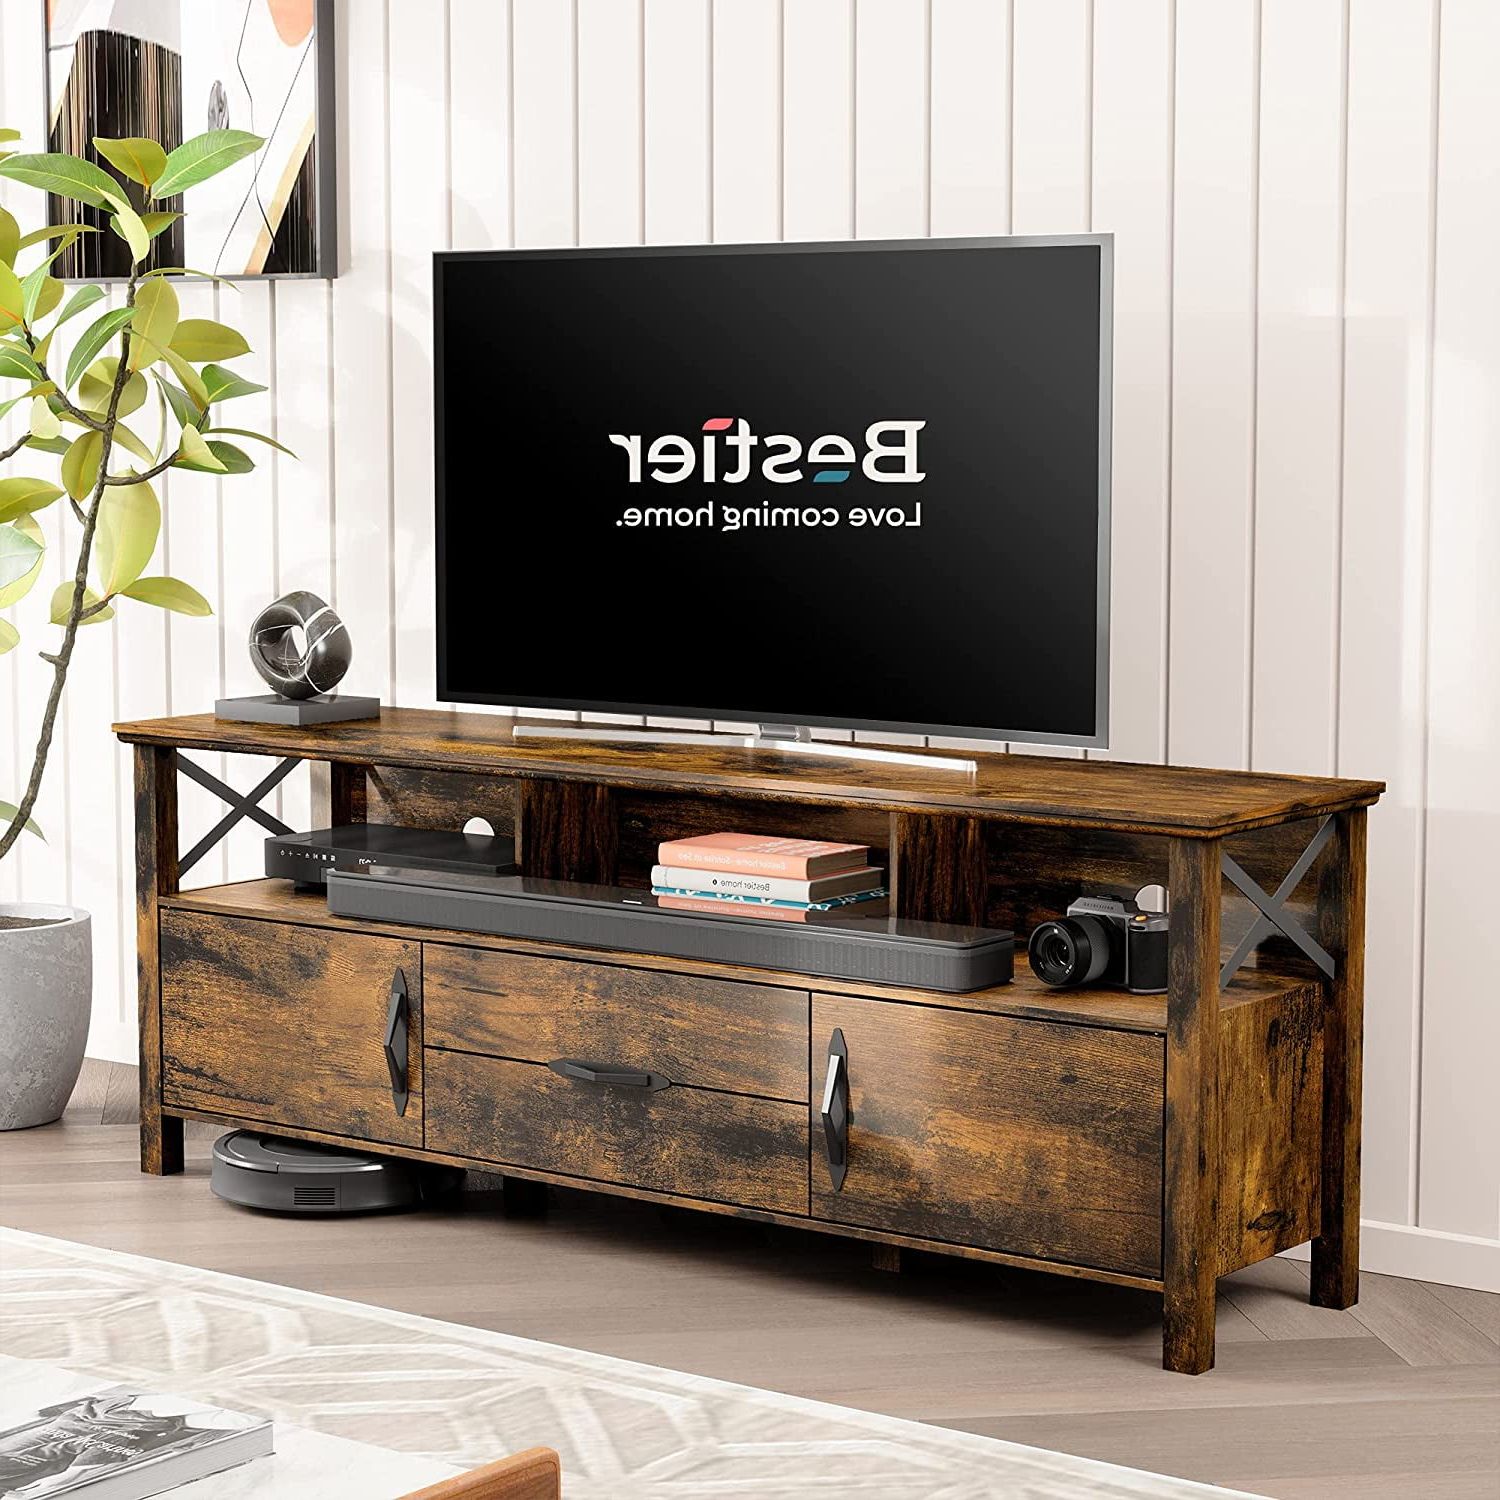 Cafe Tv Stands With Storage Pertaining To Most Recently Released Bestier Tv Stand For Tv Up To 70 Inch, Tv Cabinet With Wooden Drawer (View 14 of 15)